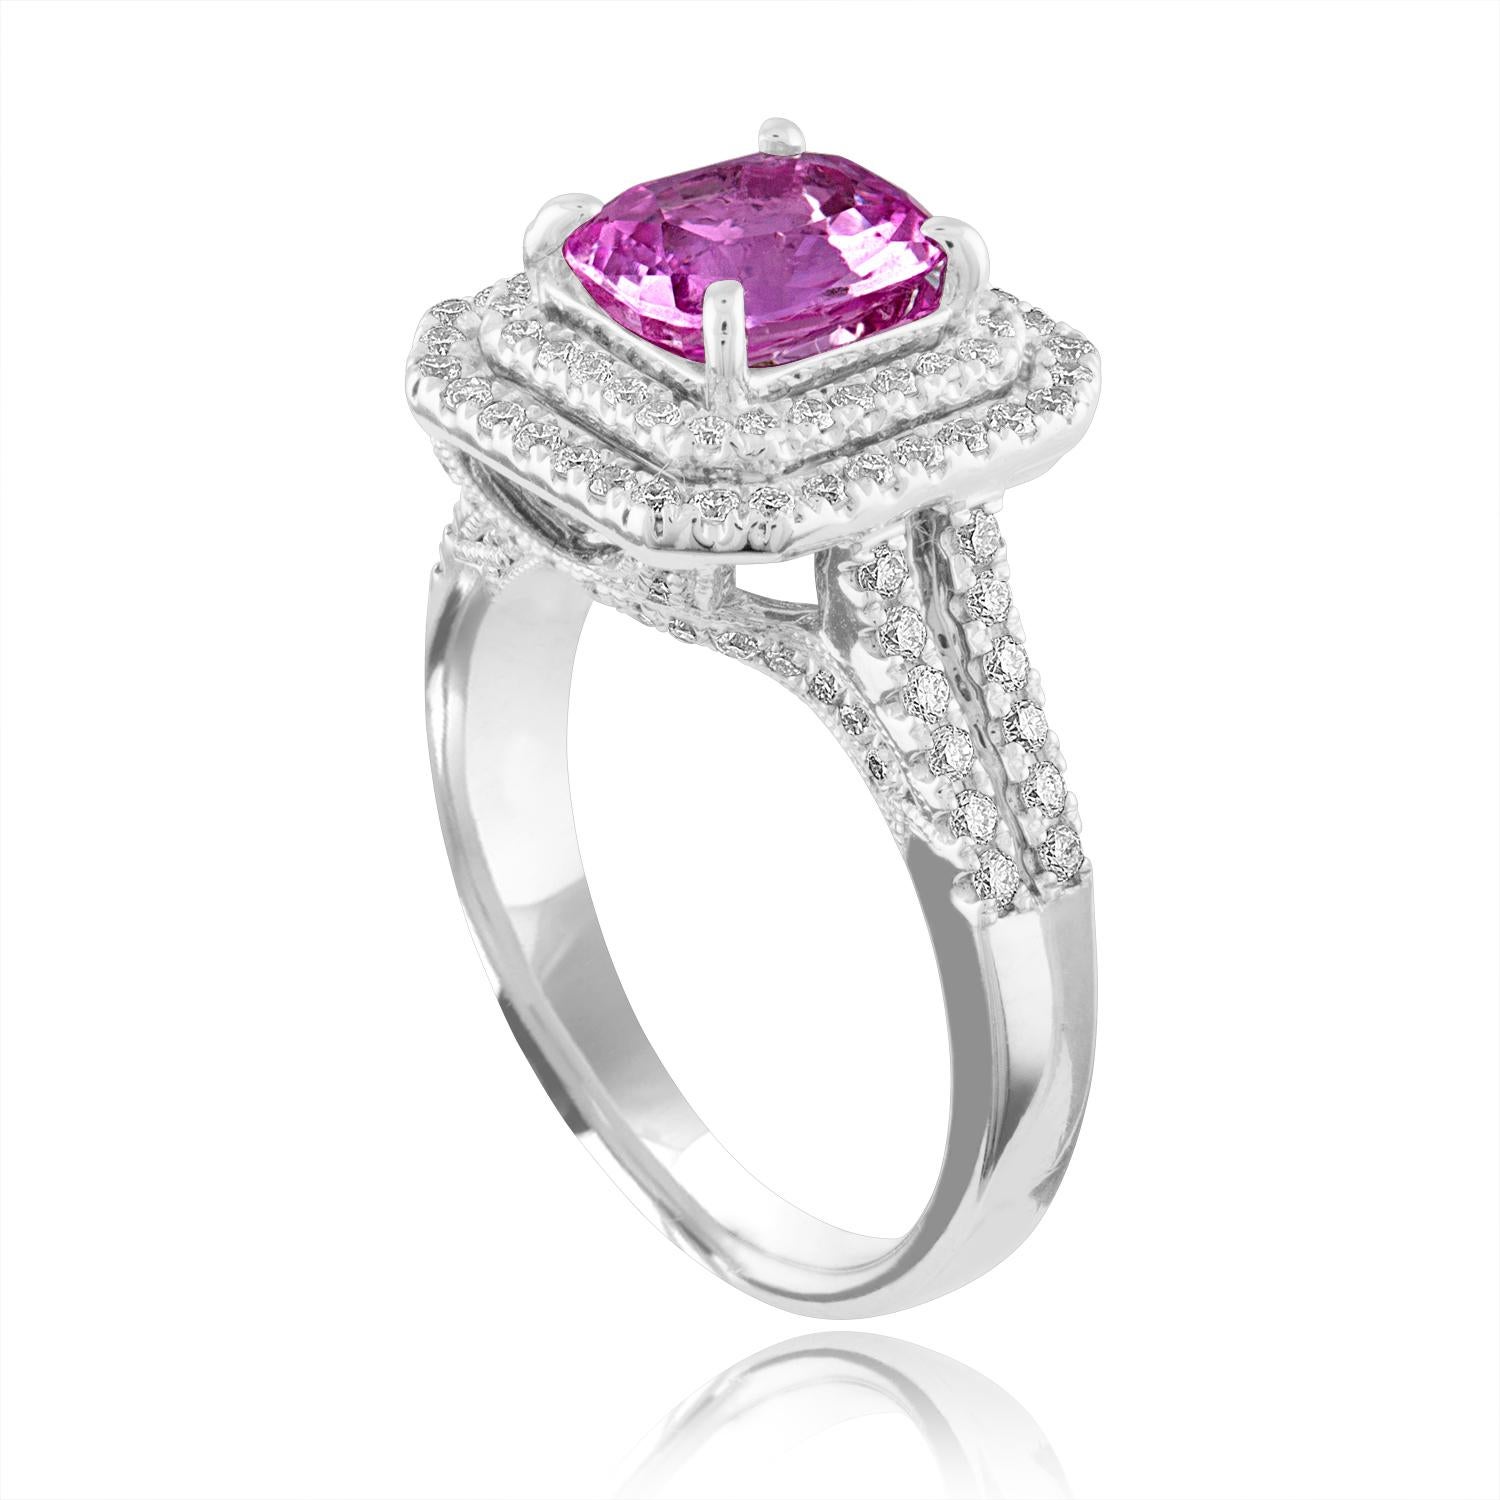 Exquisite Sapphire Surrounded by Double Diamond Halo
The ring is 18K White Gold
The Cushion Cut Sapphire is Pink 1.90 Carats
The Sapphire is Heated
There are 0.74 Carats in Diamonds F/G VS/SI
The ring is a size 6.50, sizable.
The ring weighs 7.6